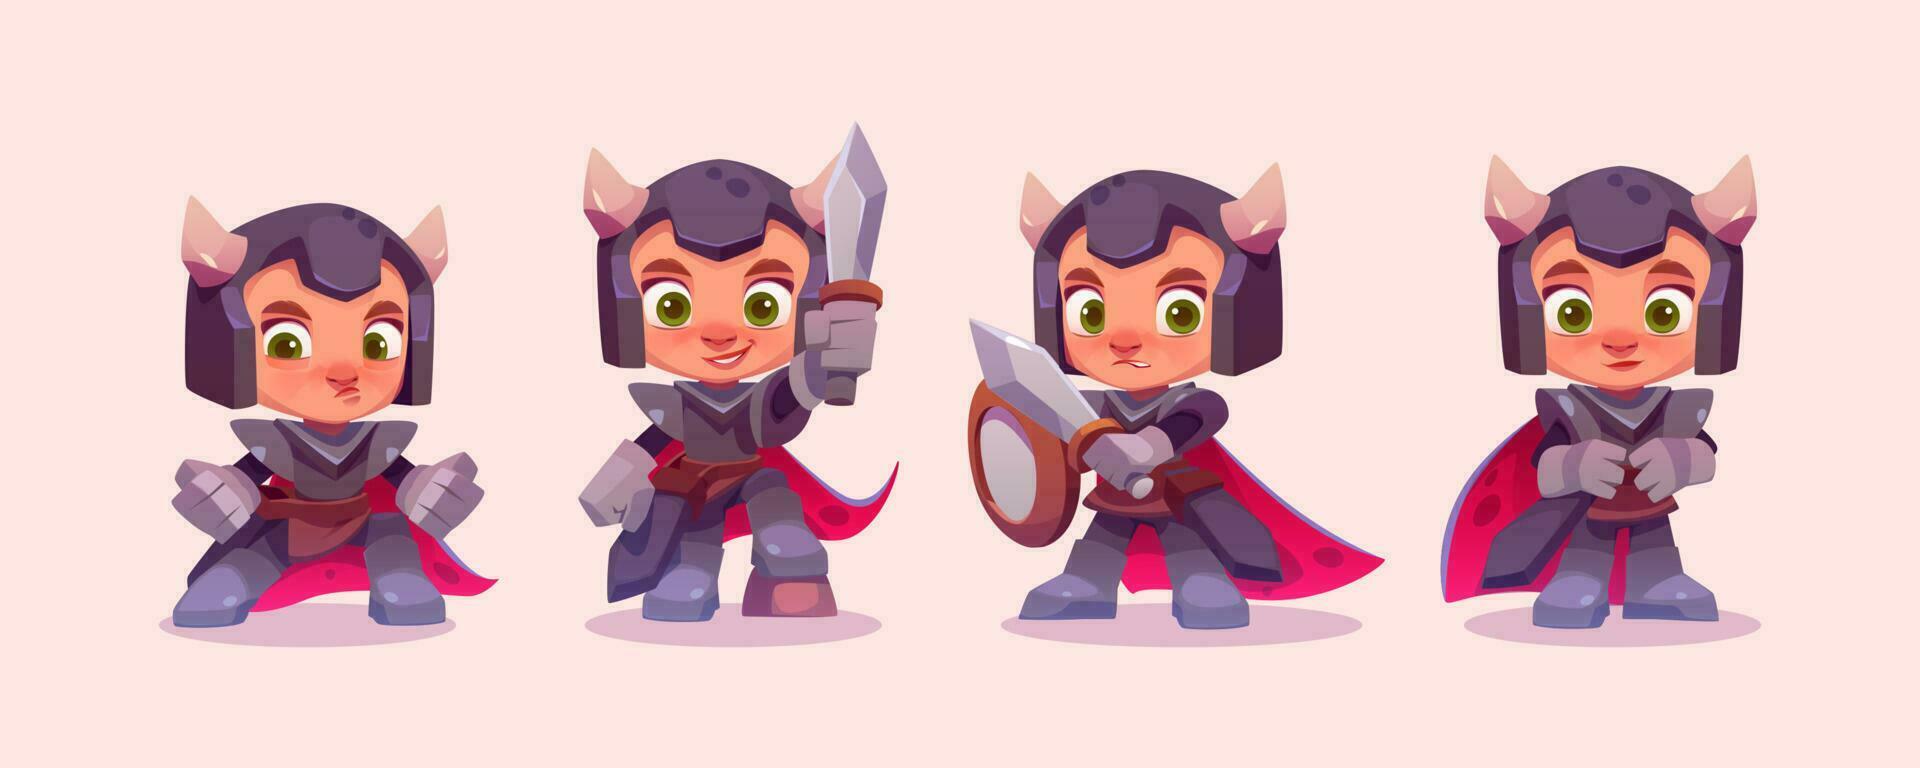 Cute knight character with shield and sword. vector